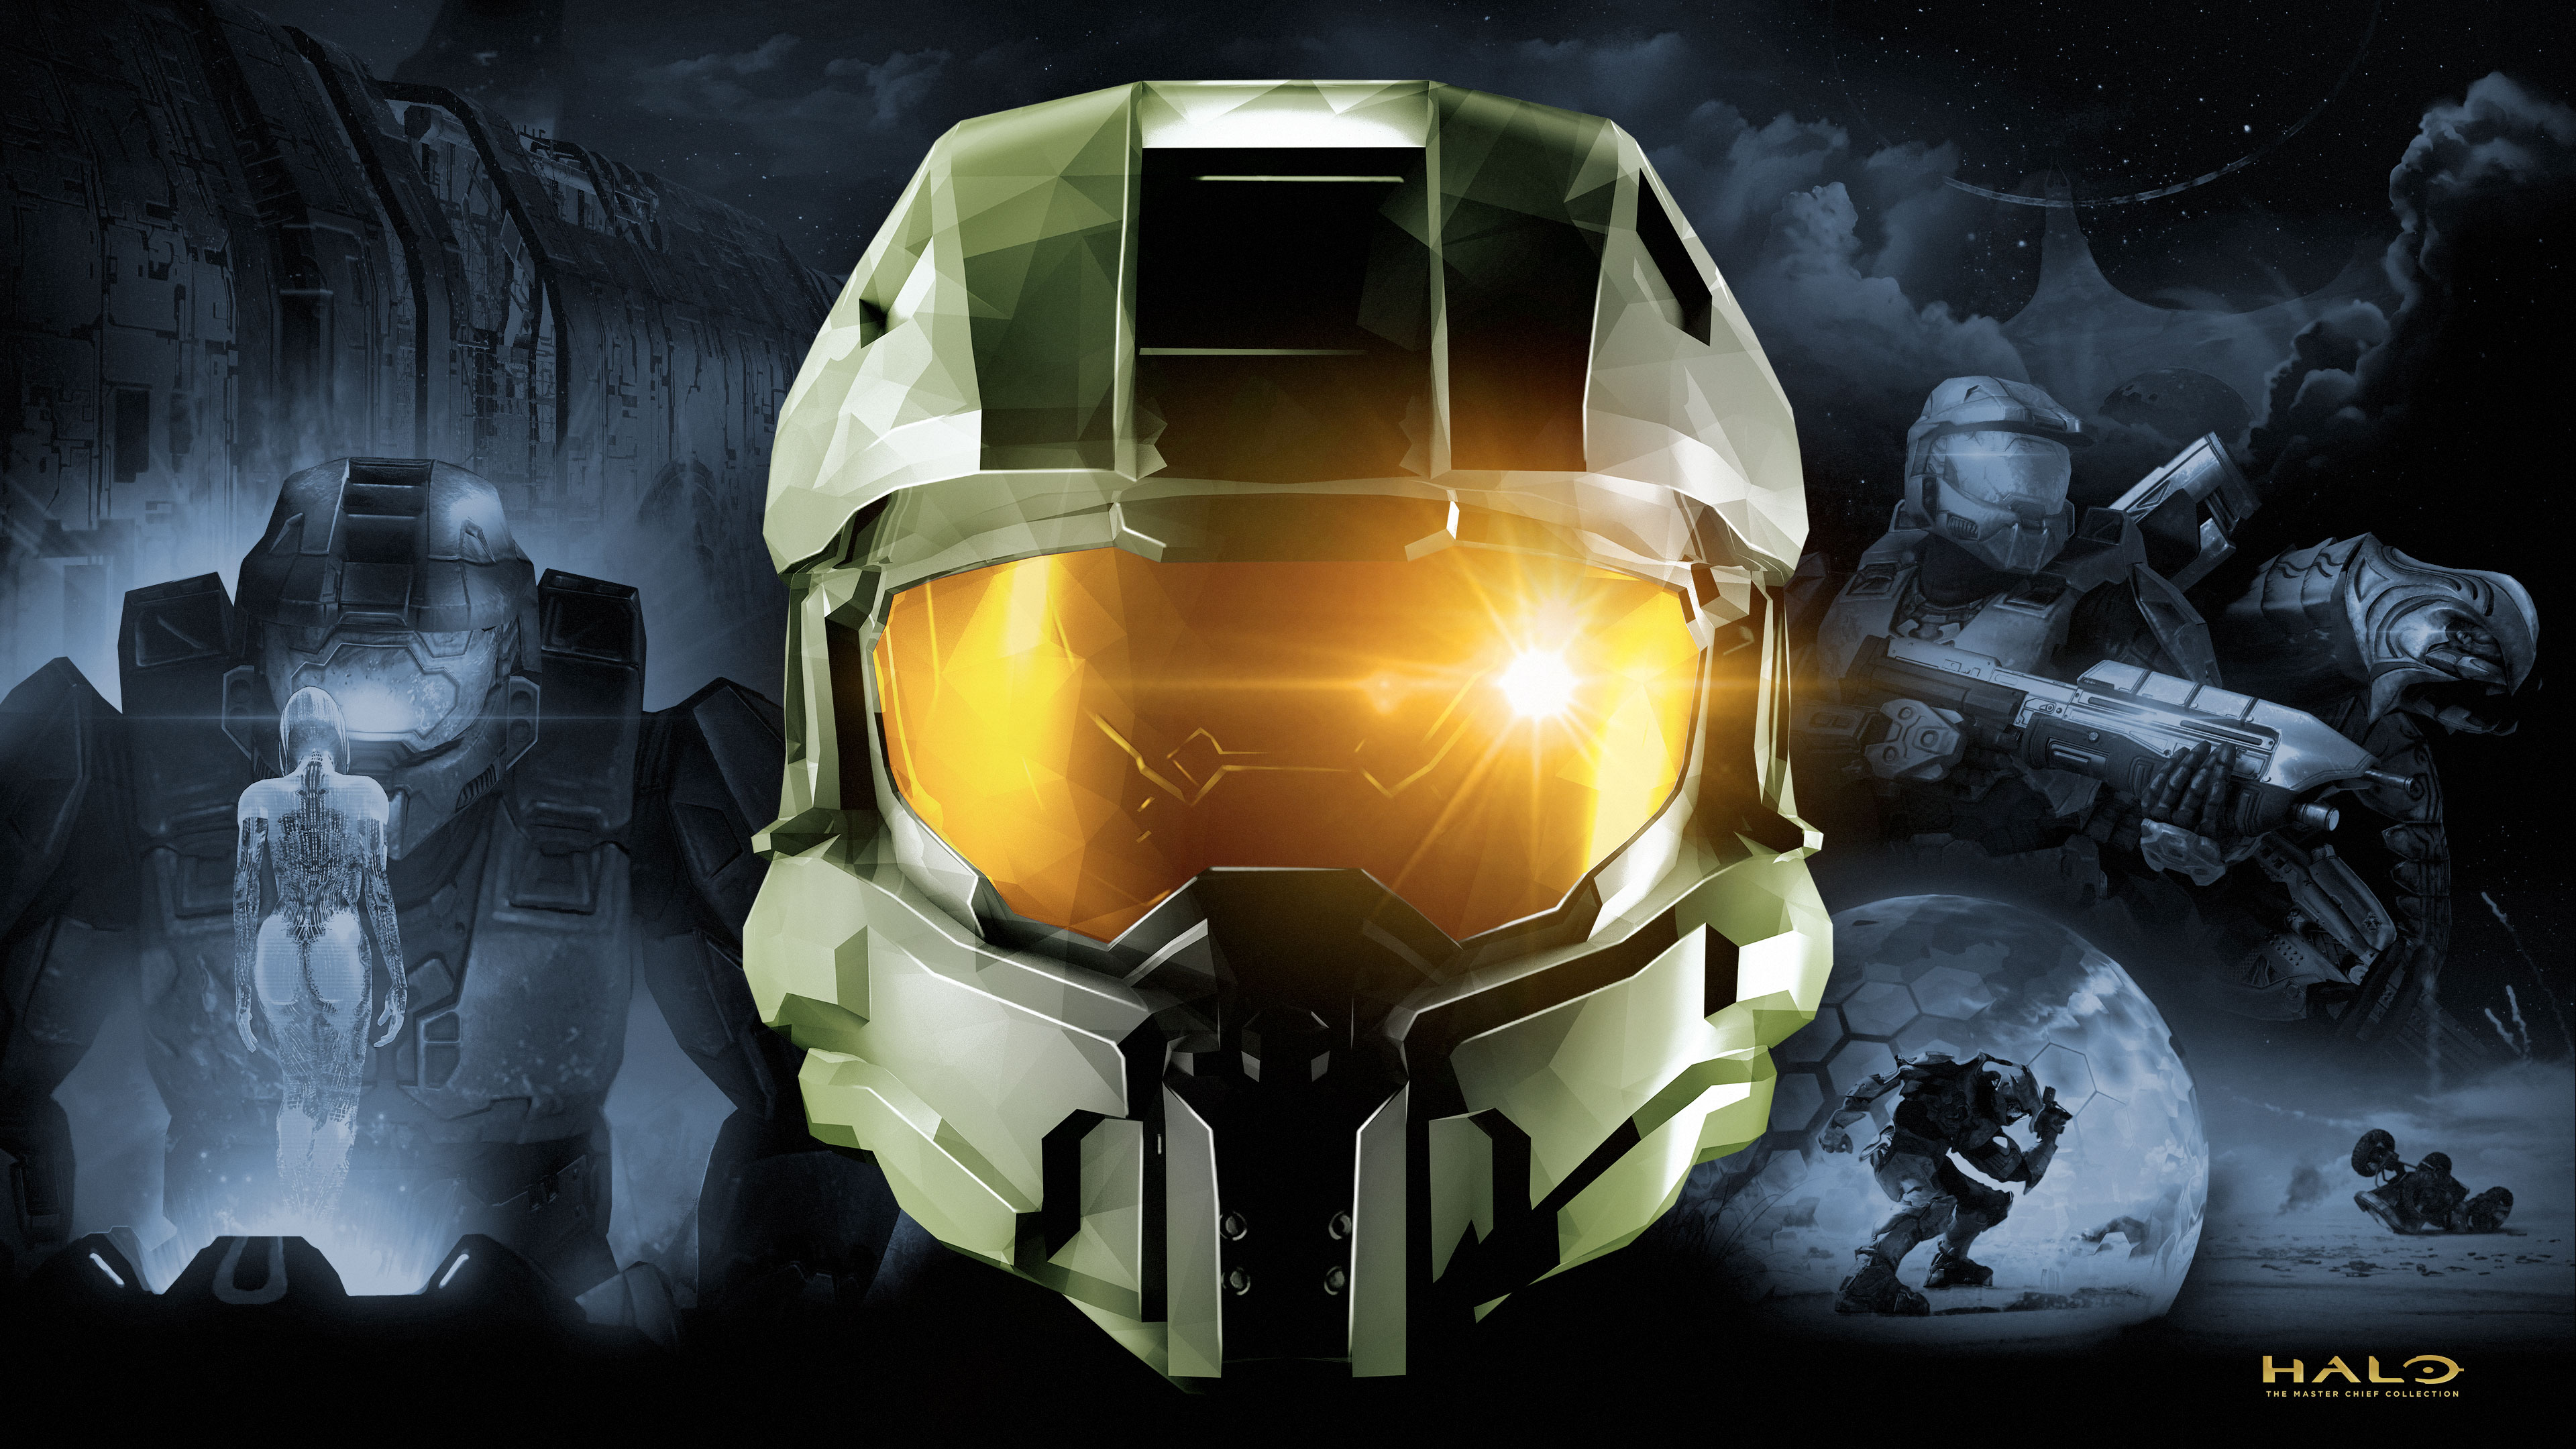 halo: the master chief collection, video game, halo 3, halo